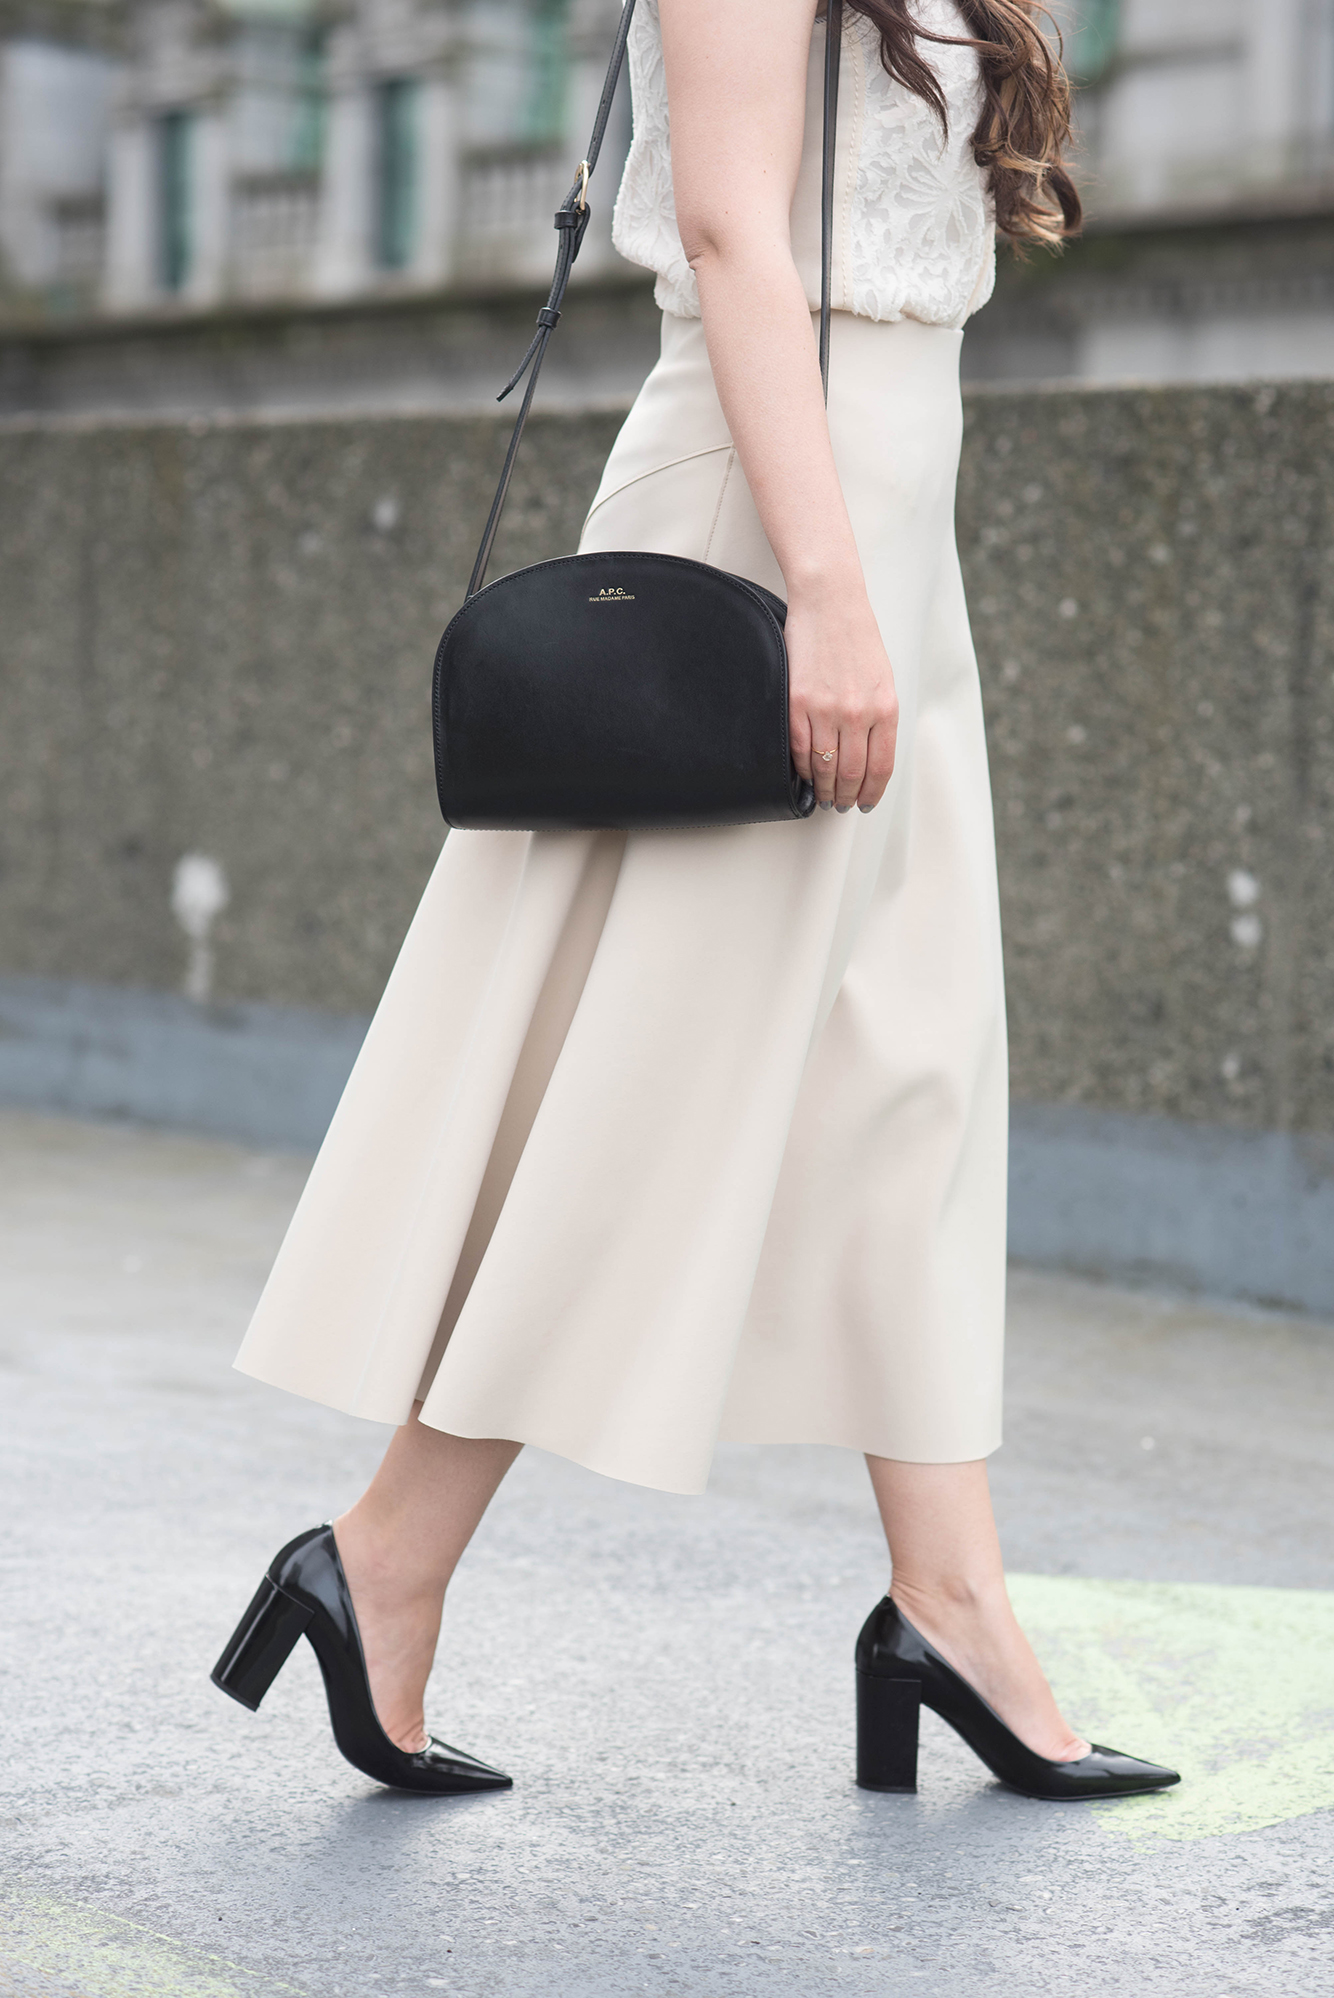 coco-and-vera-best-vancouver-fashion-blog-best-canadian-fashion-blog-top-blogger-outfit-details-marc-cain-beige-skirt-pierre-hardy-block-heels-apc-half-moon-bag